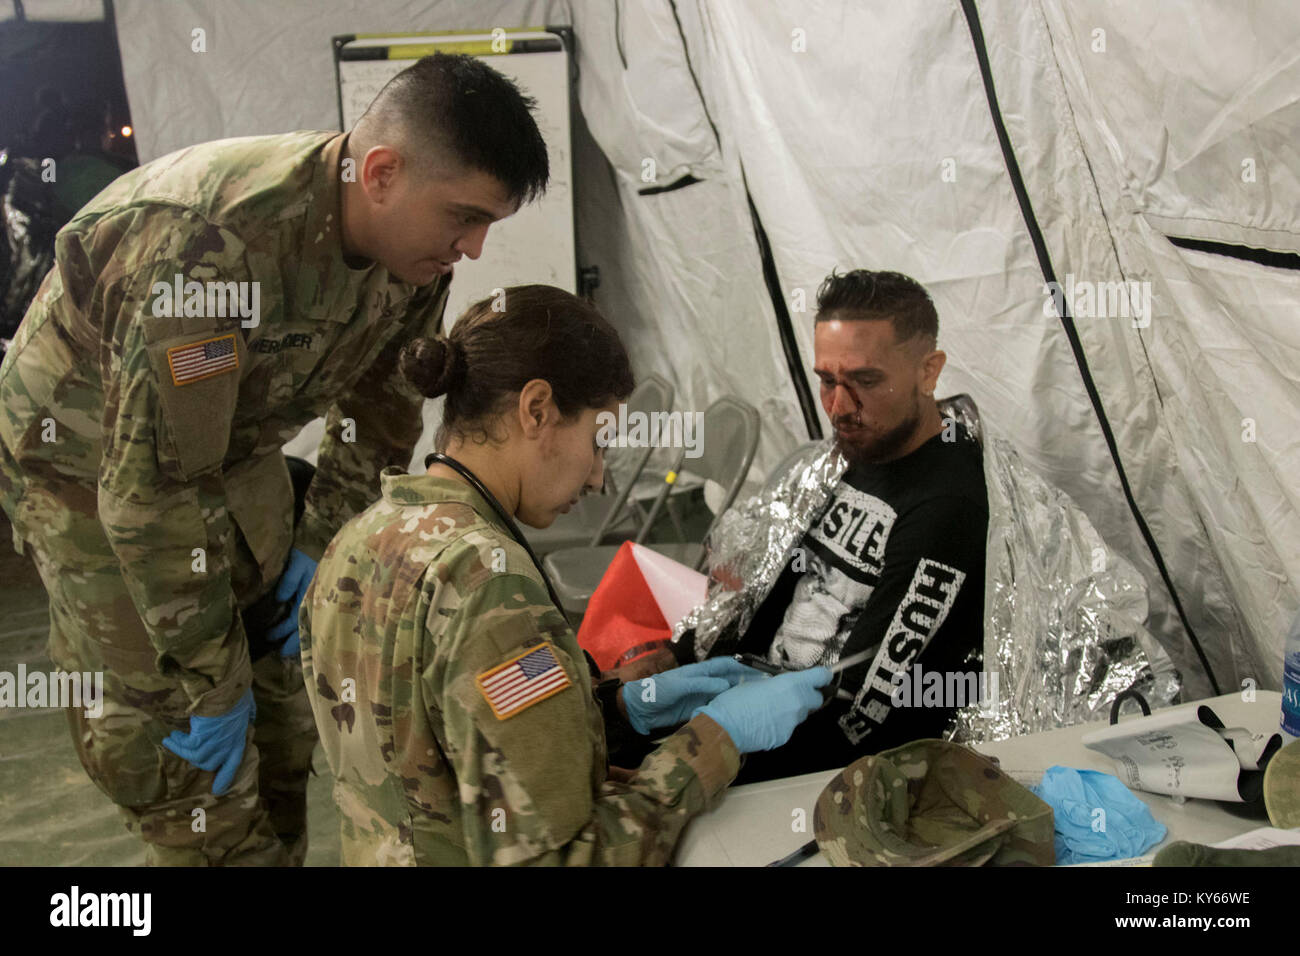 U.S. Army Soldier triage simulated casualties during a Mass Casualty Decontamination exercise at the Homestead-Miami Speedway, in Miami-Dade, Florida, Jan. 9, 2018. This is the 3rd in a series of joint training exercises between Active Duty, Guard, and Reserve Army units and local municipalities across the United States. This JTE focused on the decontamination and transportation of casualties in a simulated mass chemical attack. (DoD Stock Photo